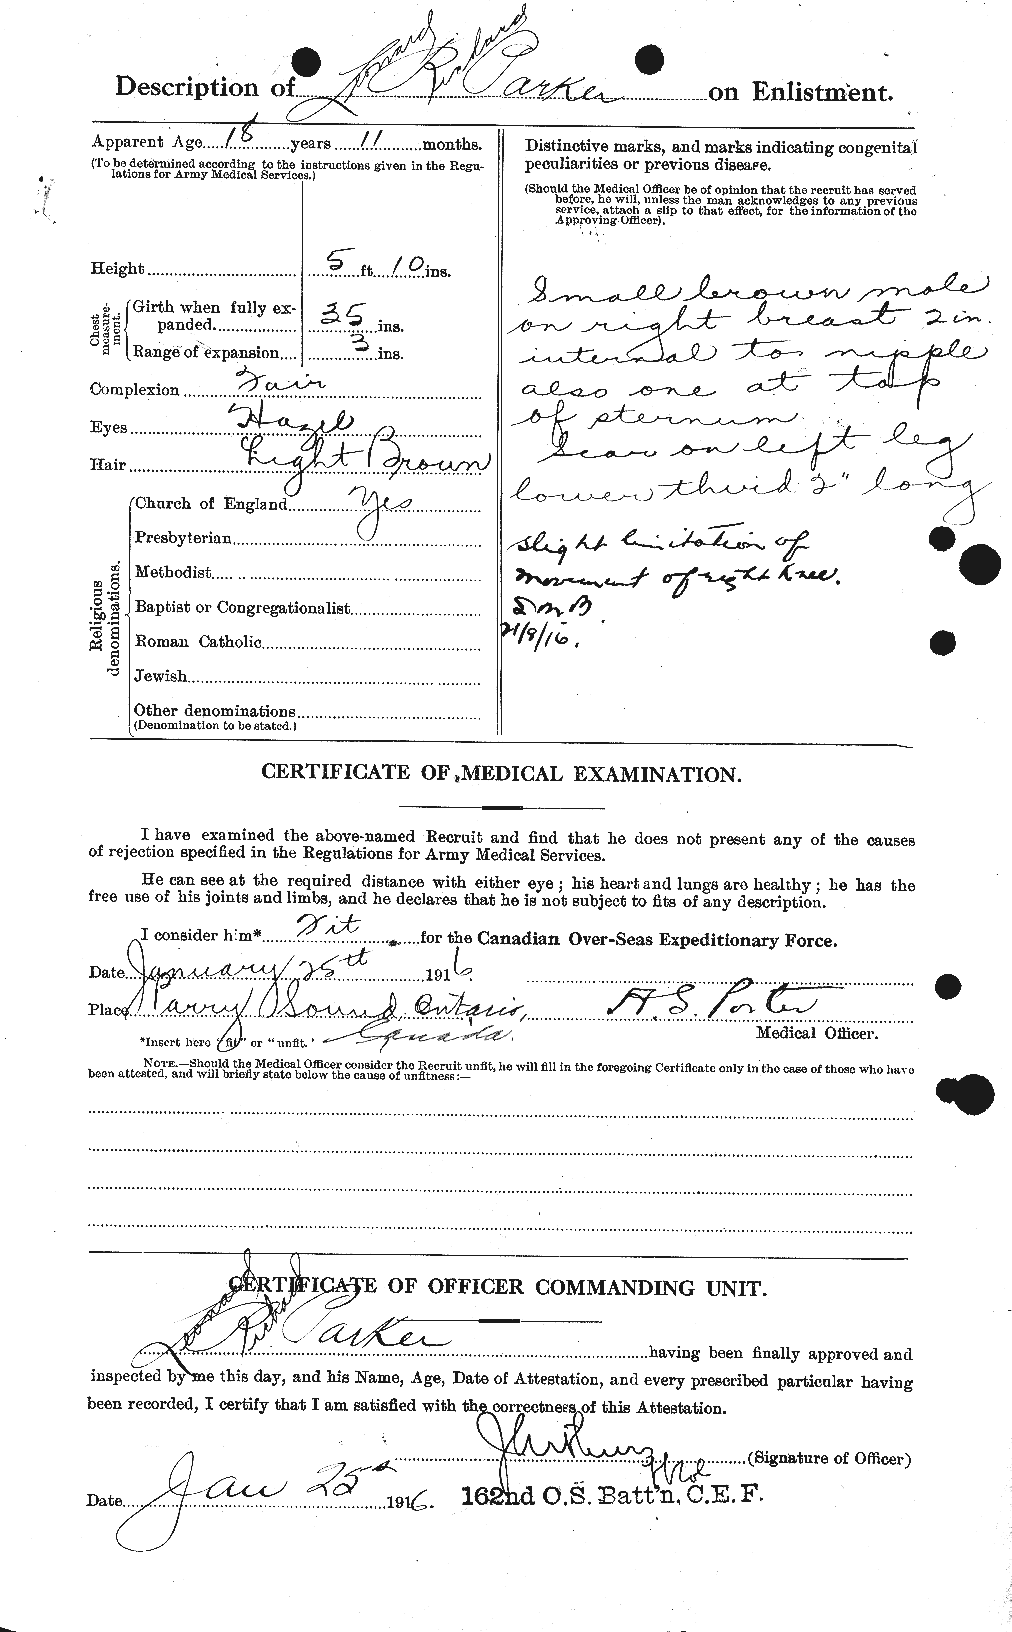 Personnel Records of the First World War - CEF 565528b